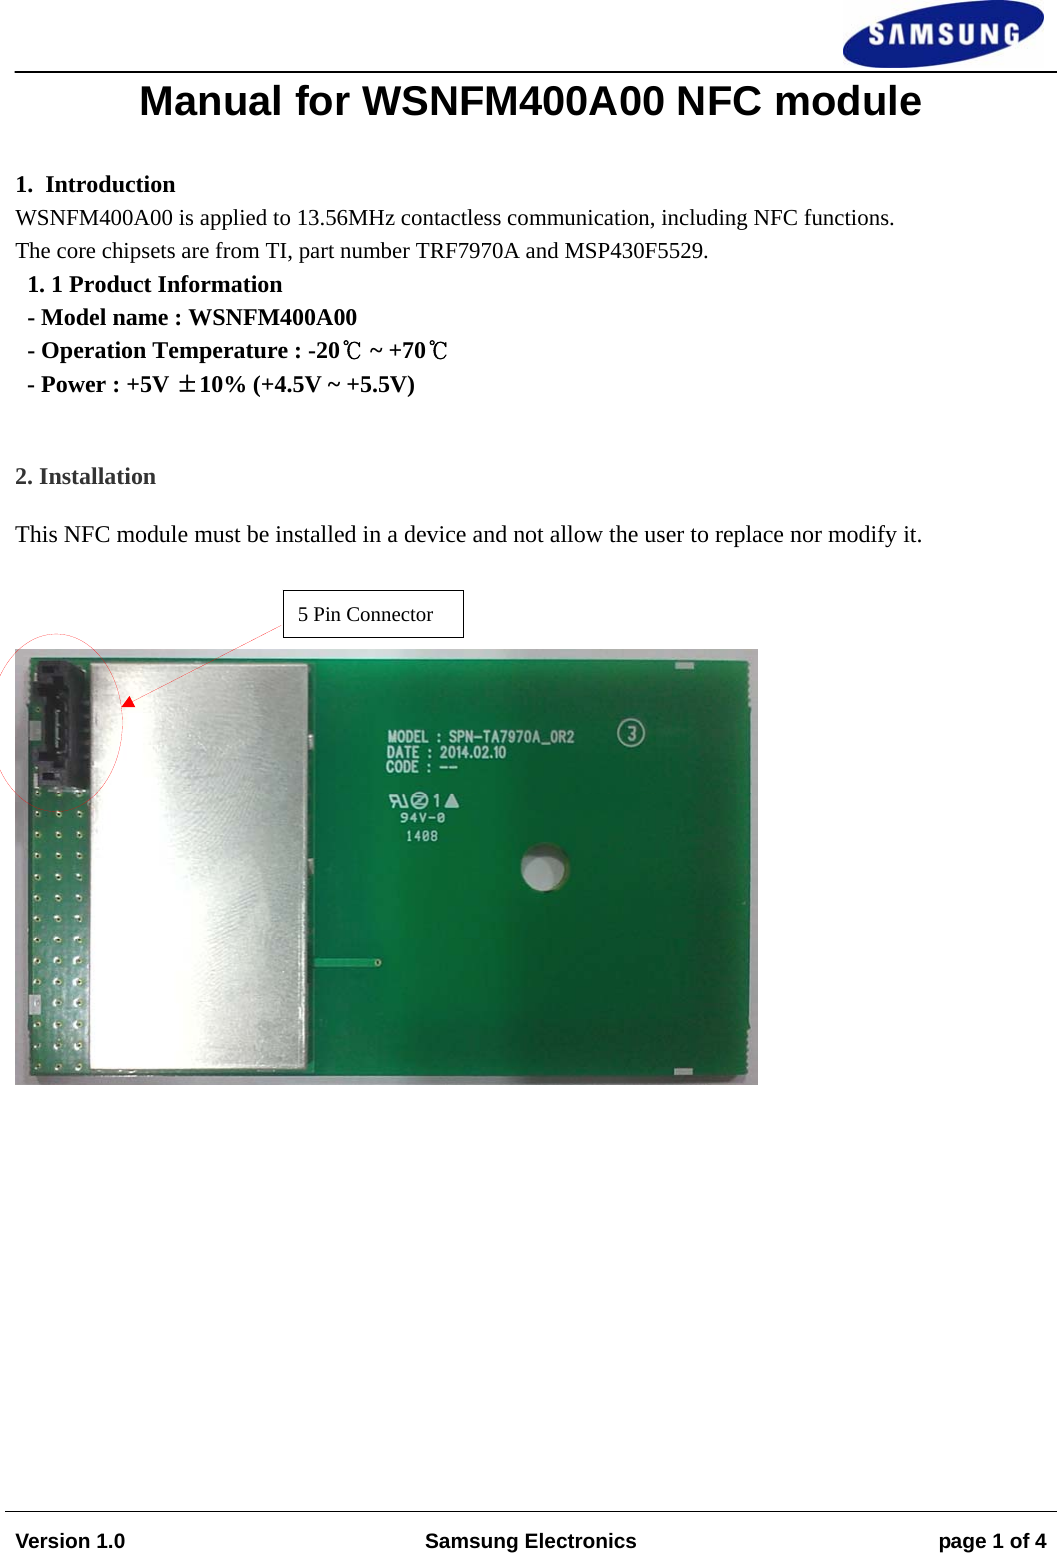                                                                                                                                                                  Version 1.0  Samsung Electronics  page 1 of 4   Manual for WSNFM400A00 NFC module  1.  Introduction WSNFM400A00 is applied to 13.56MHz contactless communication, including NFC functions.  The core chipsets are from TI, part number TRF7970A and MSP430F5529. 1. 1 Product Information   - Model name : WSNFM400A00 - Operation Temperature : -20℃ ~ +70℃ - Power : +5V ±10% (+4.5V ~ +5.5V)  2. Installation This NFC module must be installed in a device and not allow the user to replace nor modify it.   5 Pin Connector 